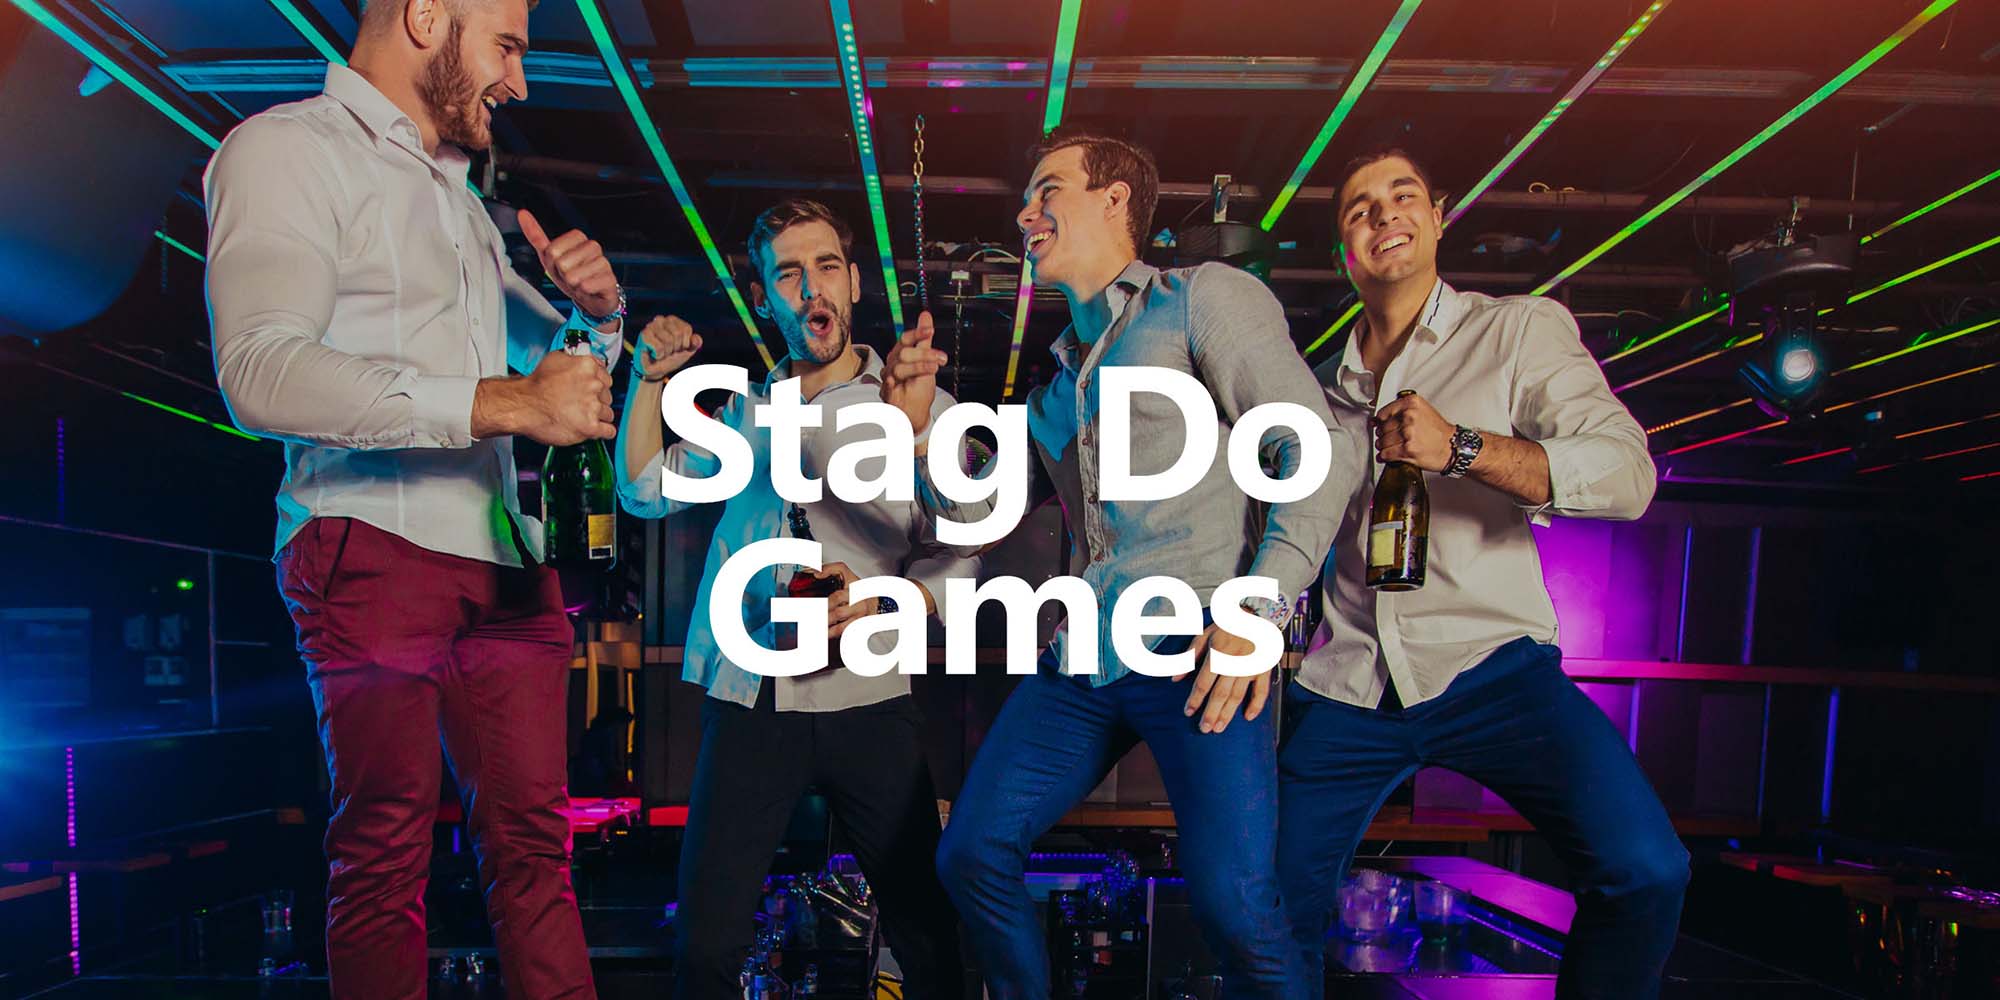 Funny Stag Do Ideas - Stag Do Games